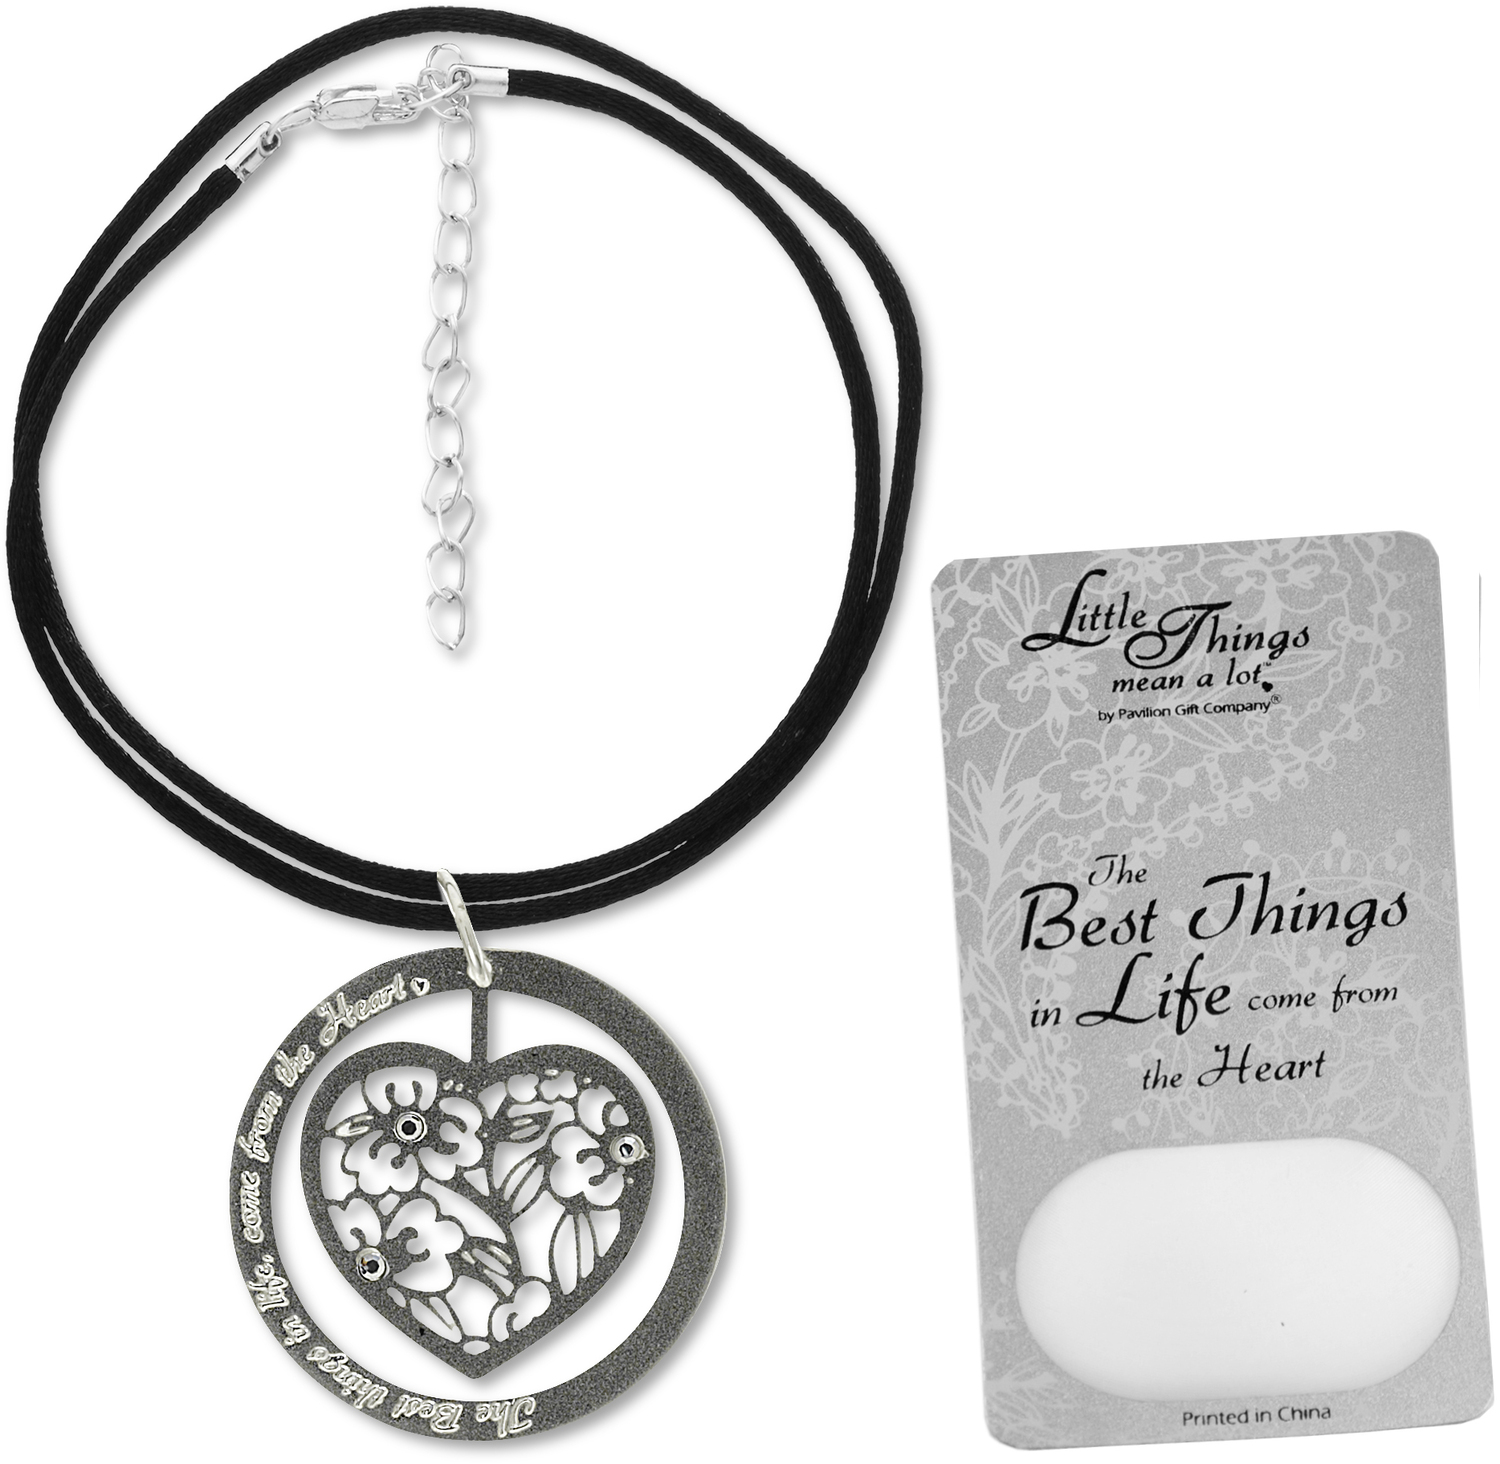 The Best Things... Necklace by Little Things Mean A Lot - The Best Things... Necklace - With 1.5" Heart Pendant